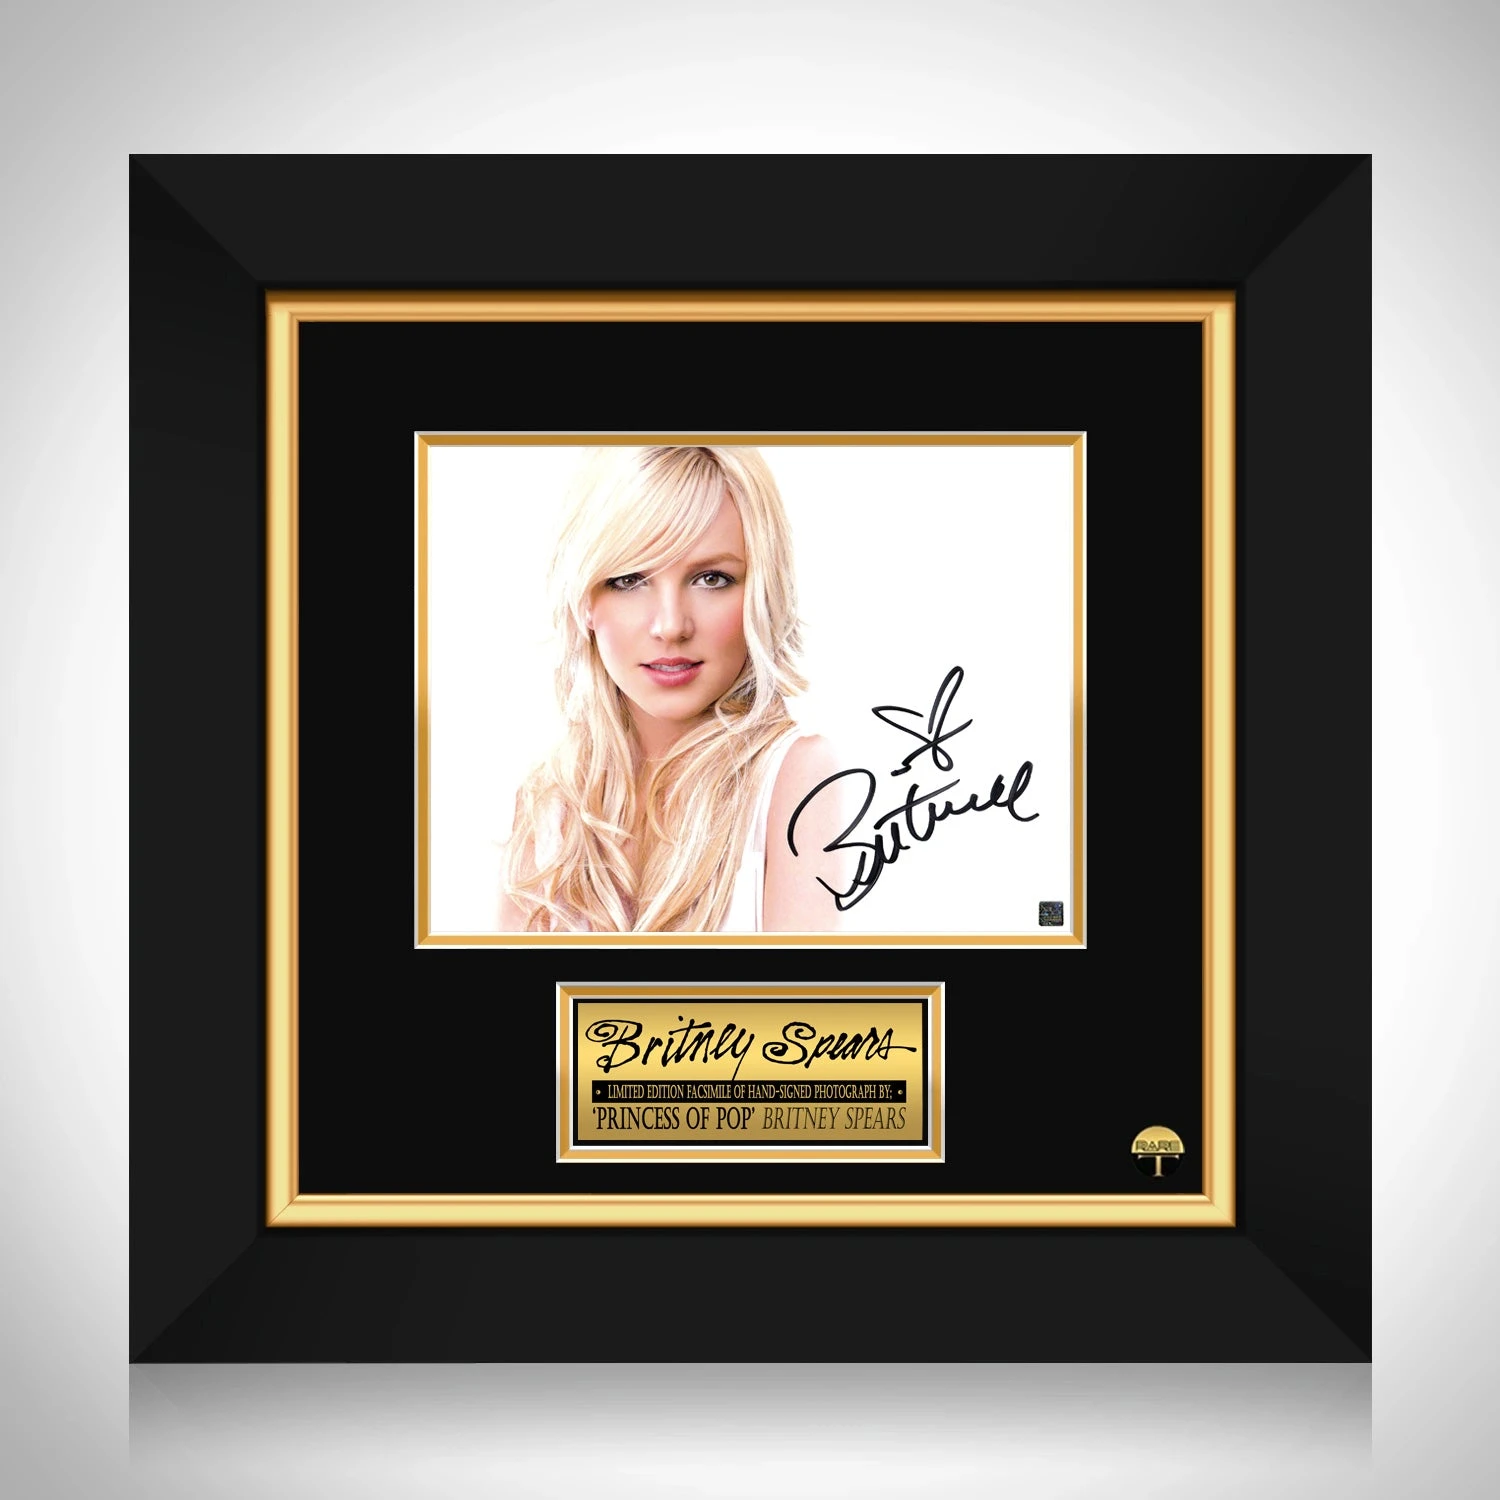 Britney Spears Photo Limited Signature Edition Custom Frame  - $204.73